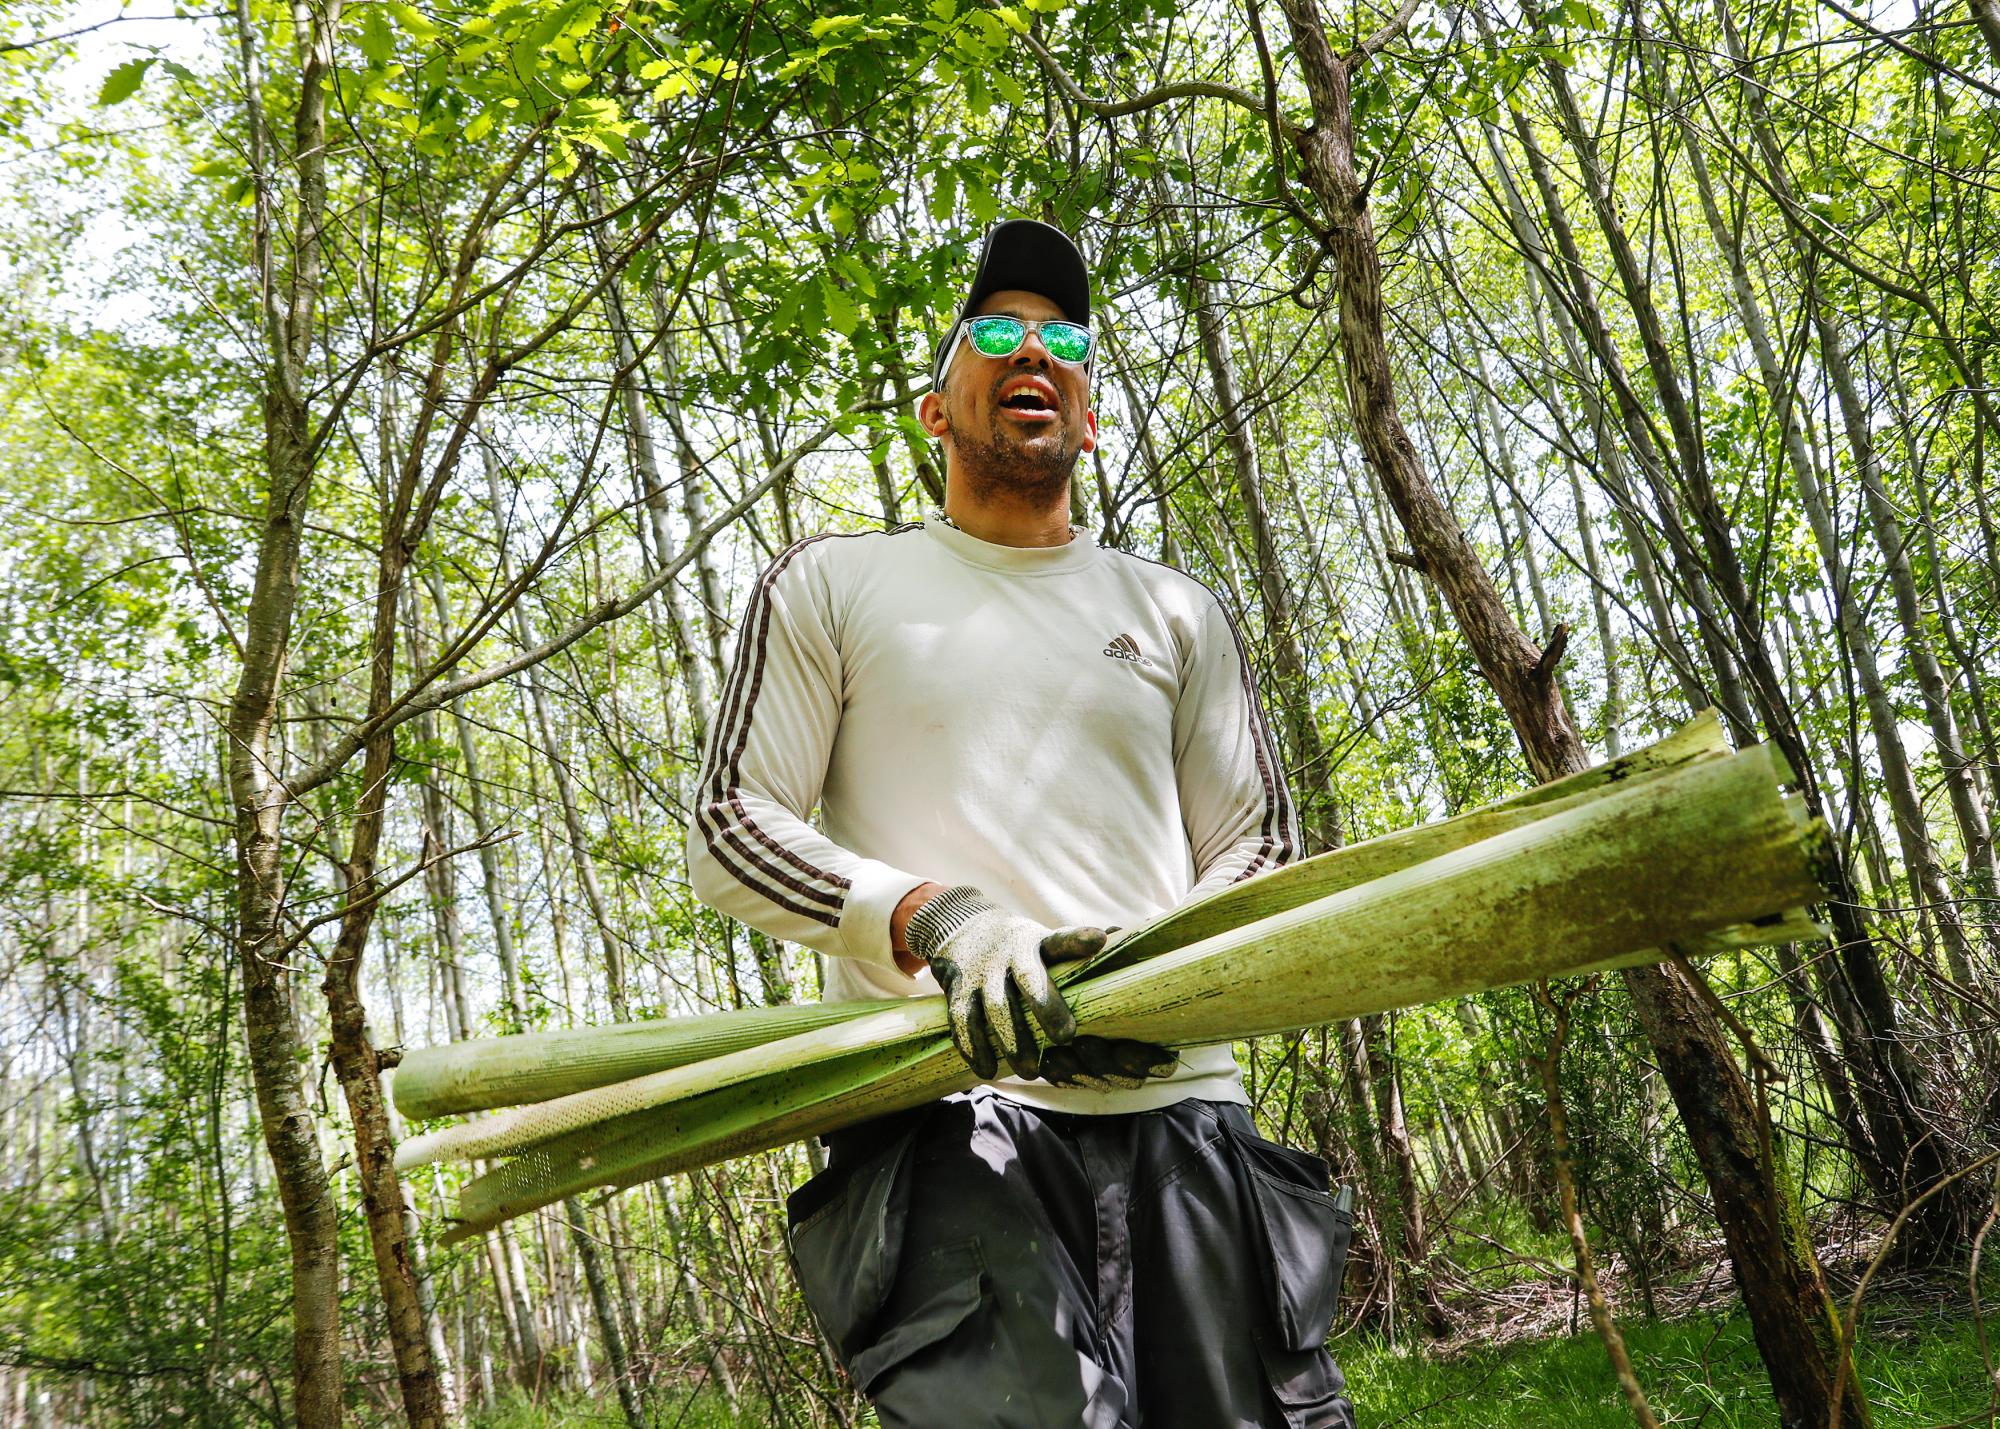 Volunteer, Leon is walking through woodland with sunglasses on, he is carrying tree guards